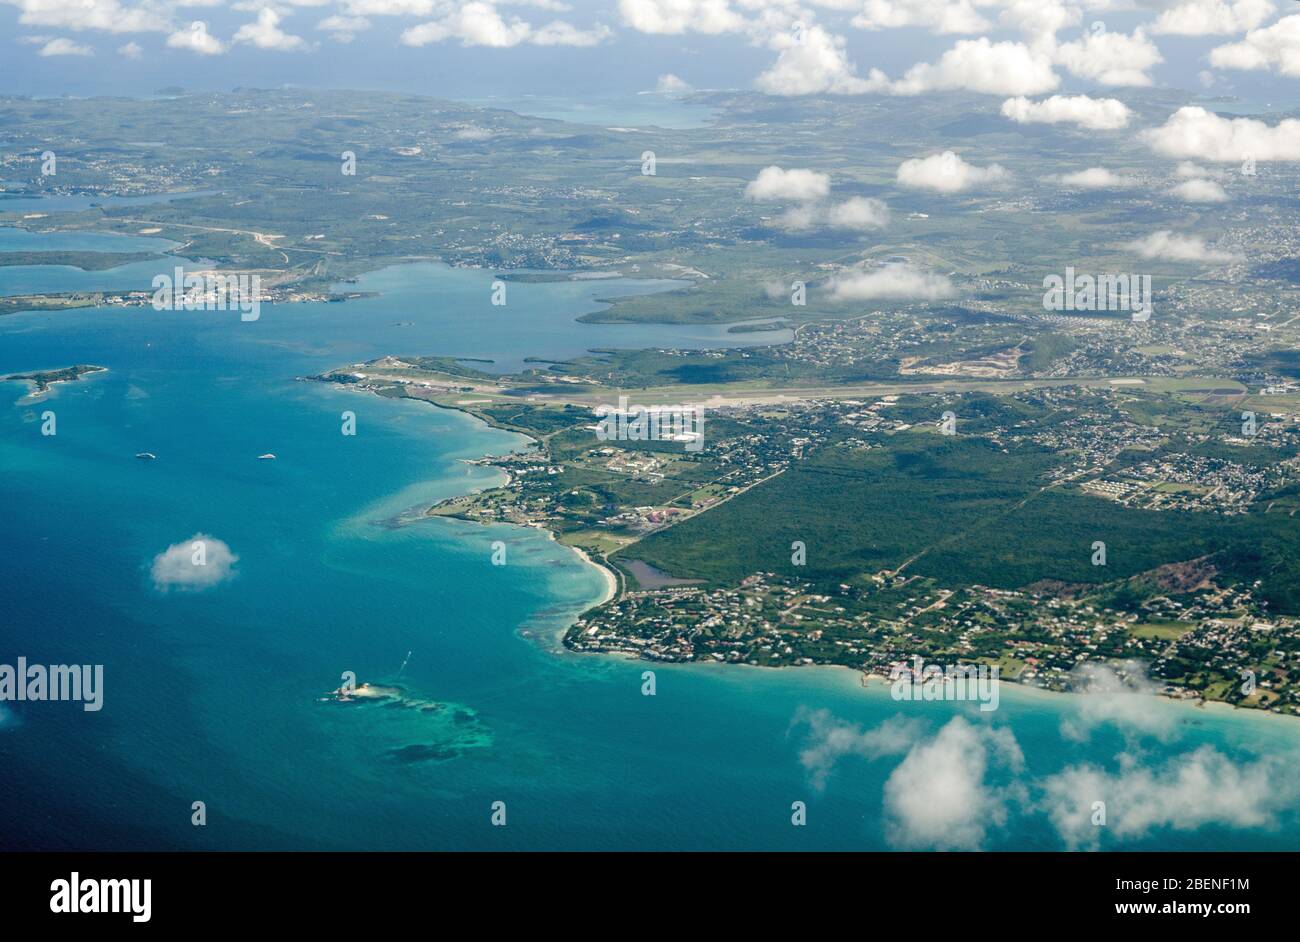 Aerial view of V.C. Bird International Airport, Cedar Grove, Osborn, Judge's Bay and Judge's Hill on the north coast of Antigua in the Caribbean. Stock Photo